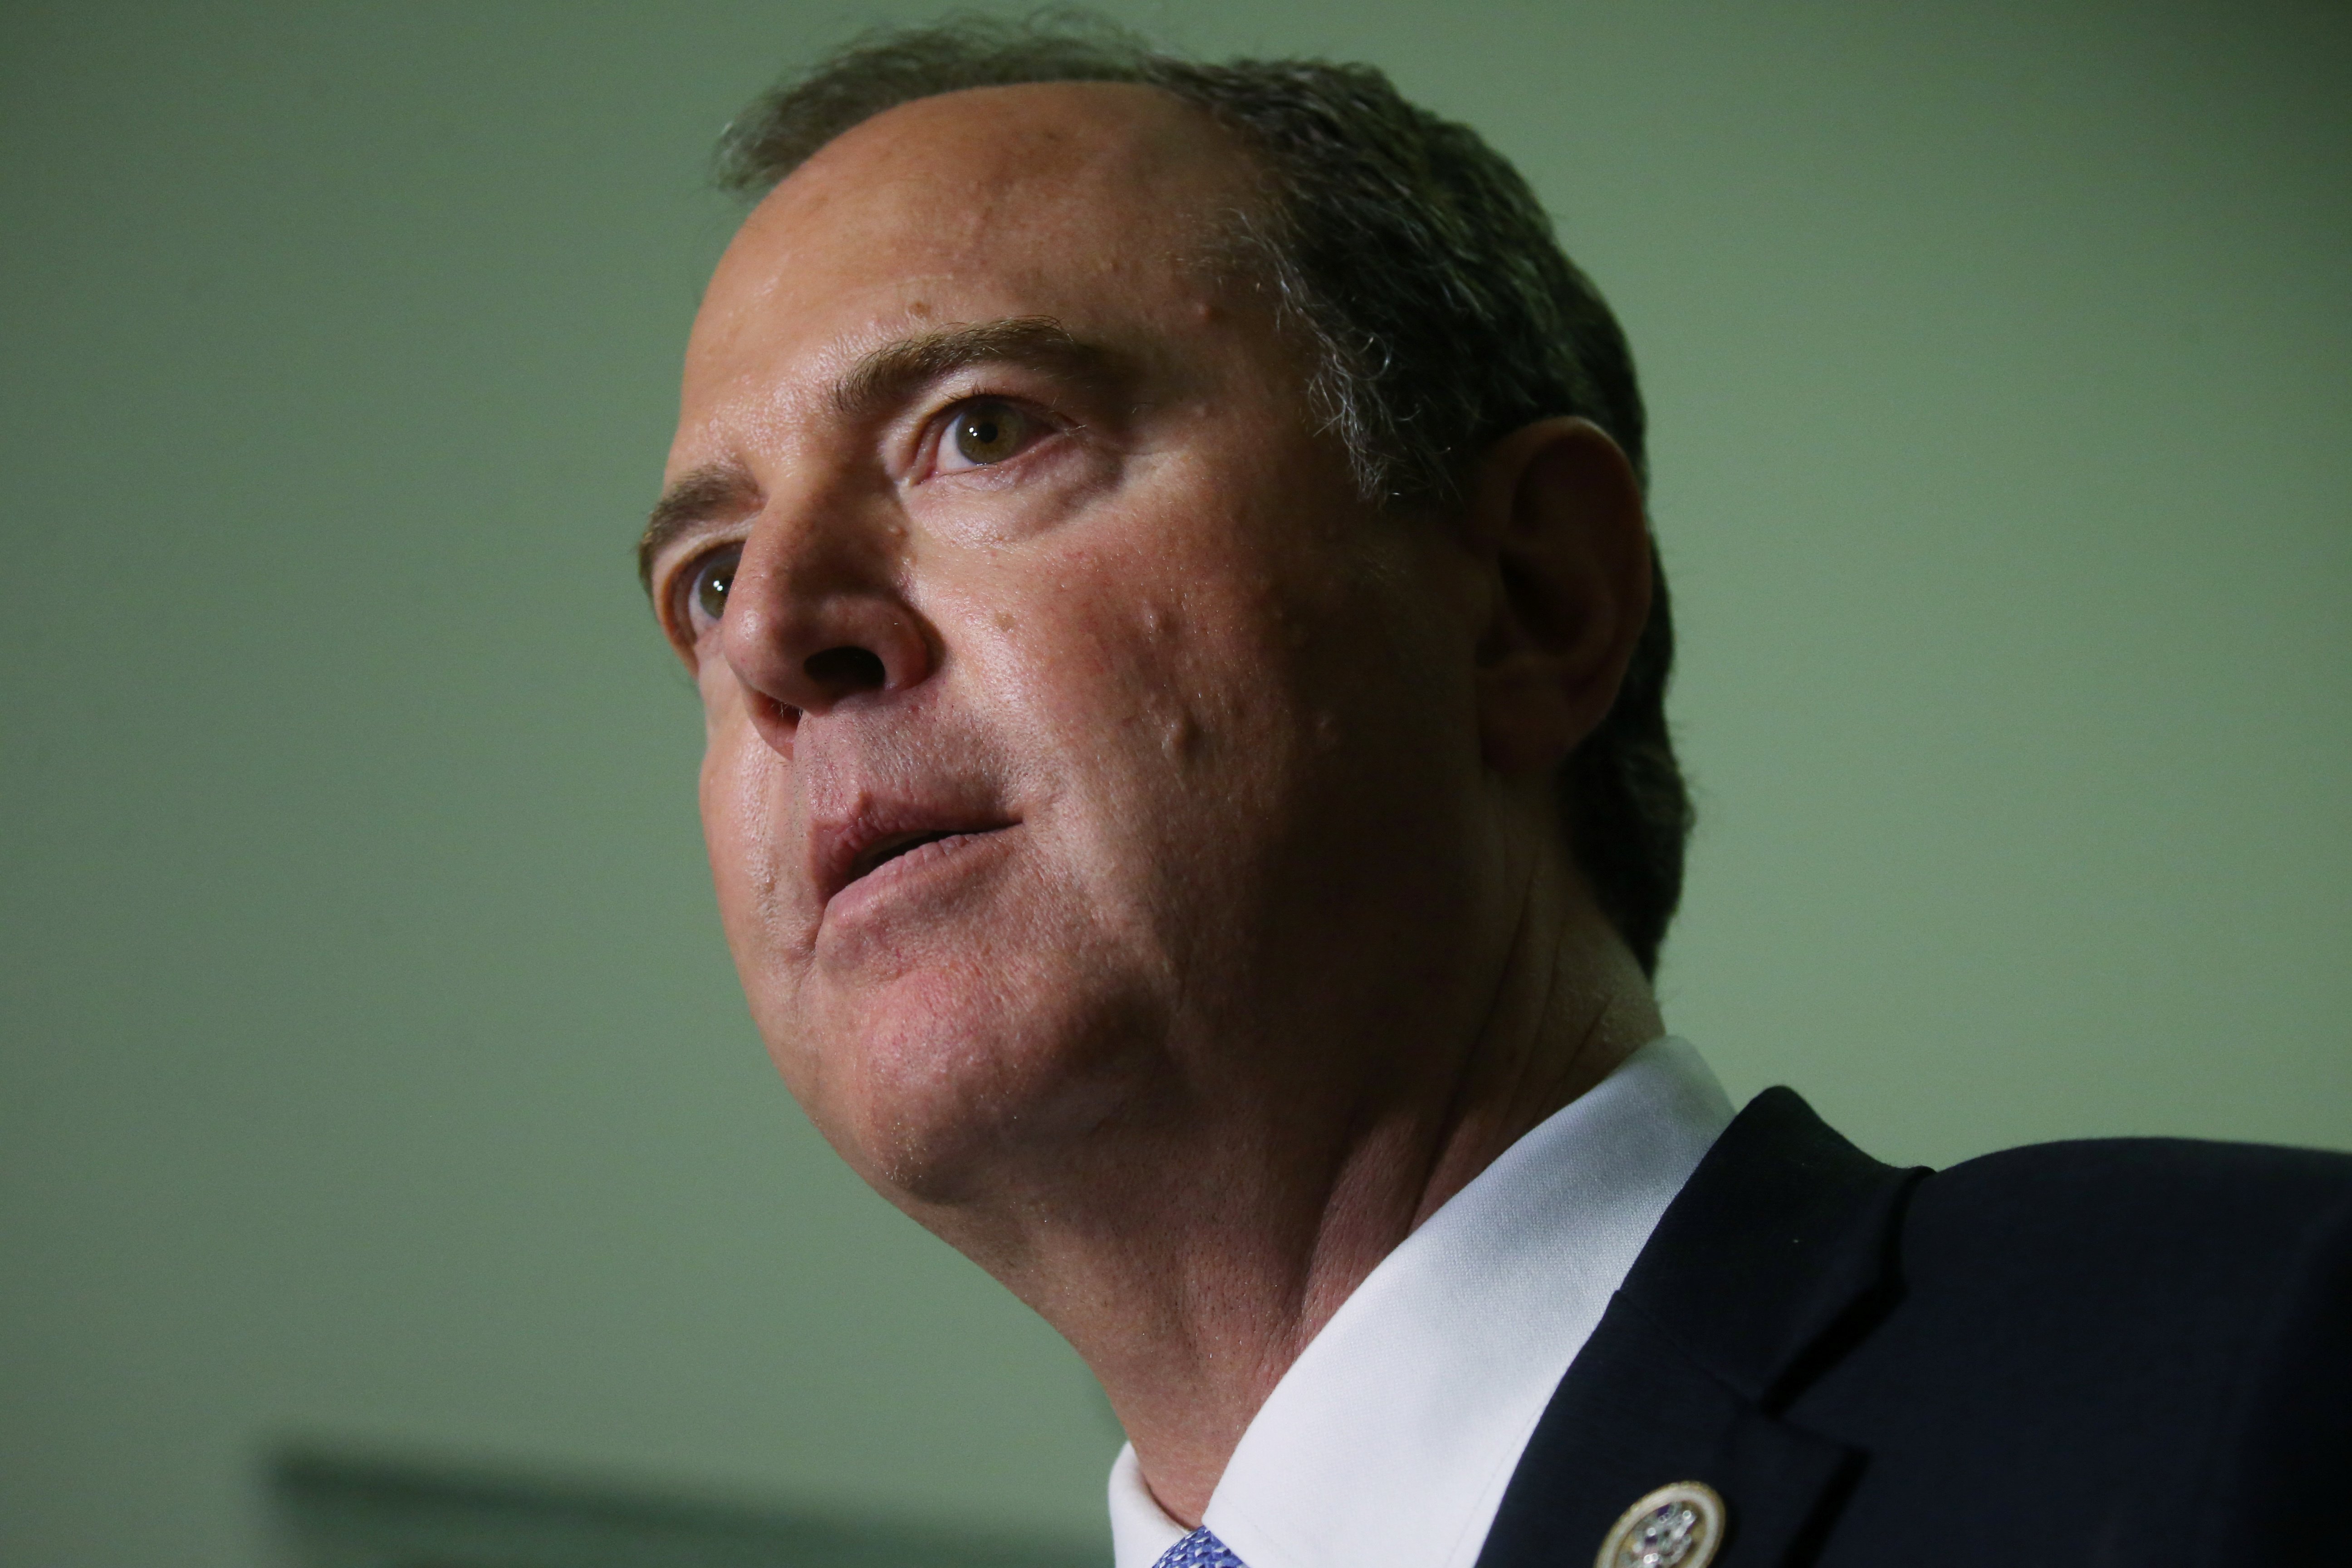 U.S. House Intelligence Committee Chair Adam Schiff (R-CA) talks to reporters after testimony from Acting Director of National Intelligence (DNI) Joseph Maguire about the handling of the whistleblower complaint on Capitol Hill in Washington, U.S., September 26, 2019. REUTERS/Leah Millis